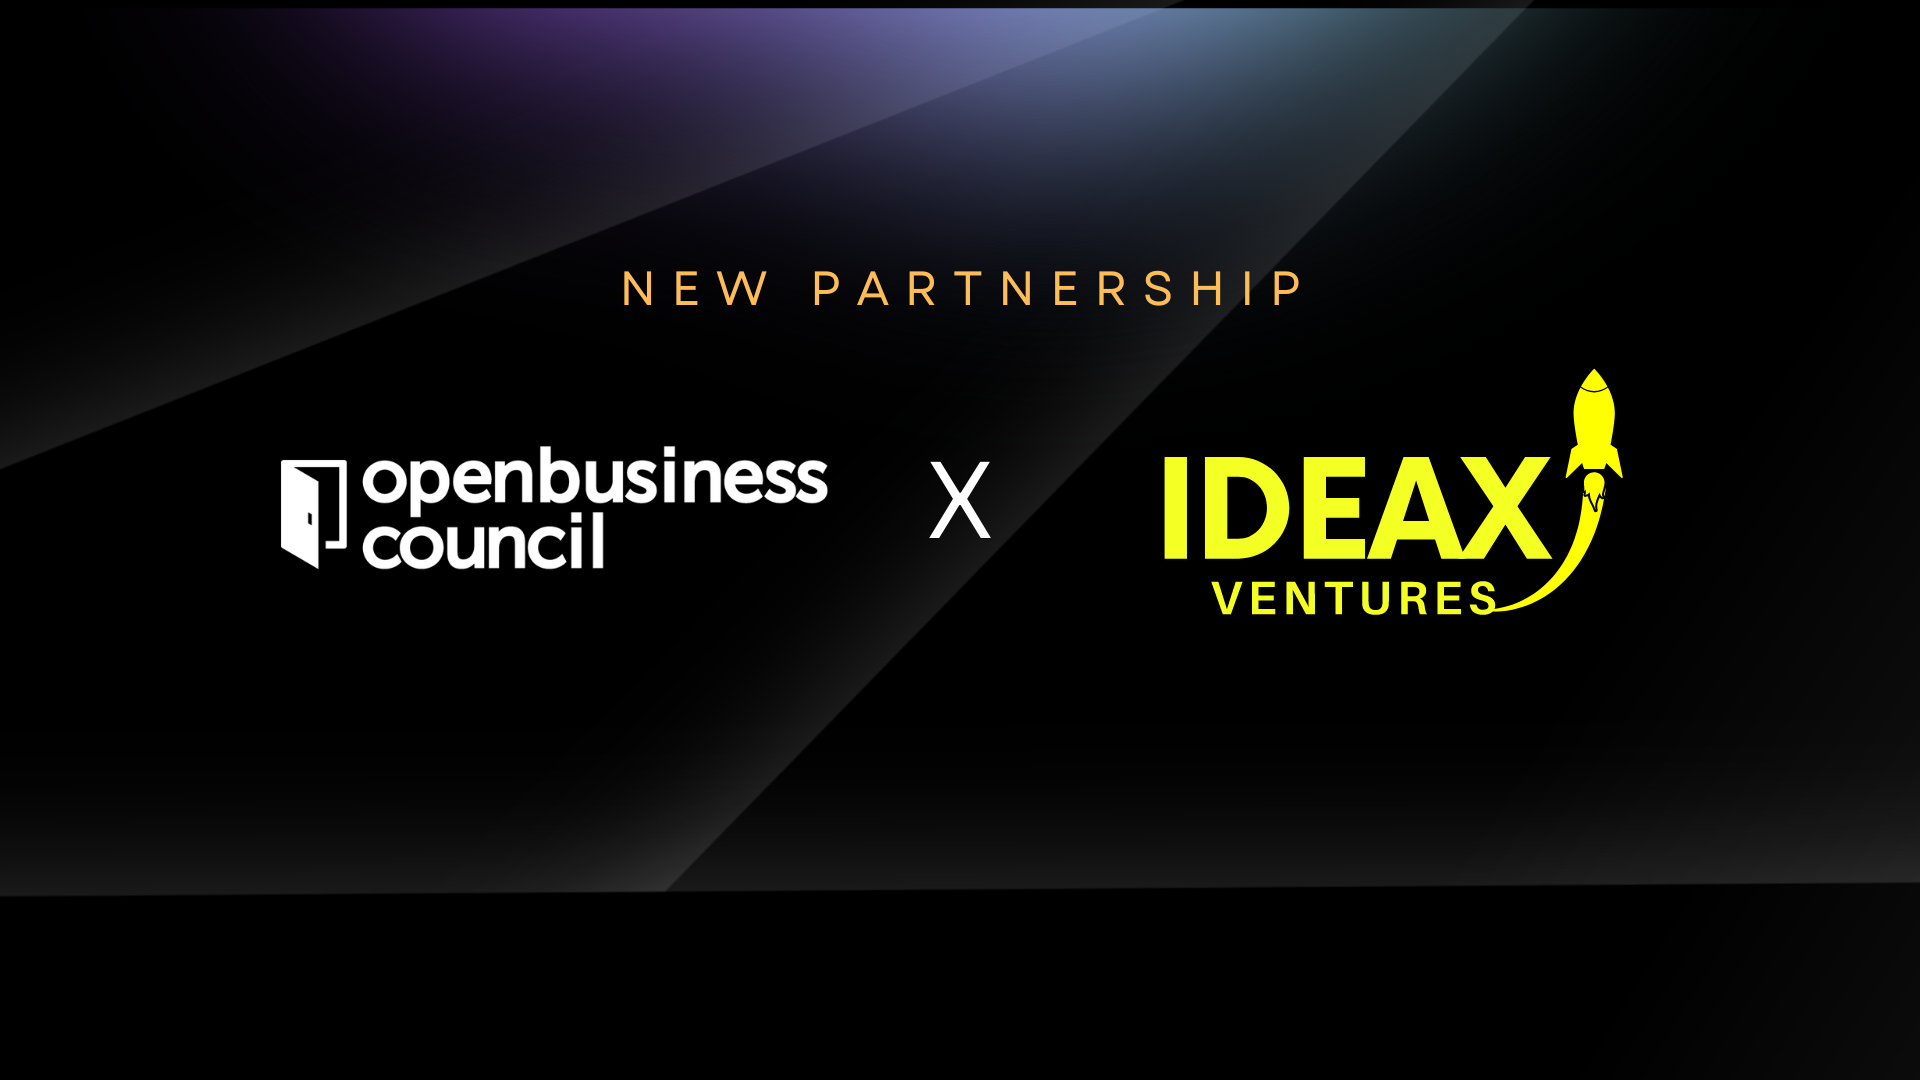 IDEAX partners with openbusinesscouncil.org to build global solutions in Web 3 technologies, Crypto, Blockchain, AI, Metaverse